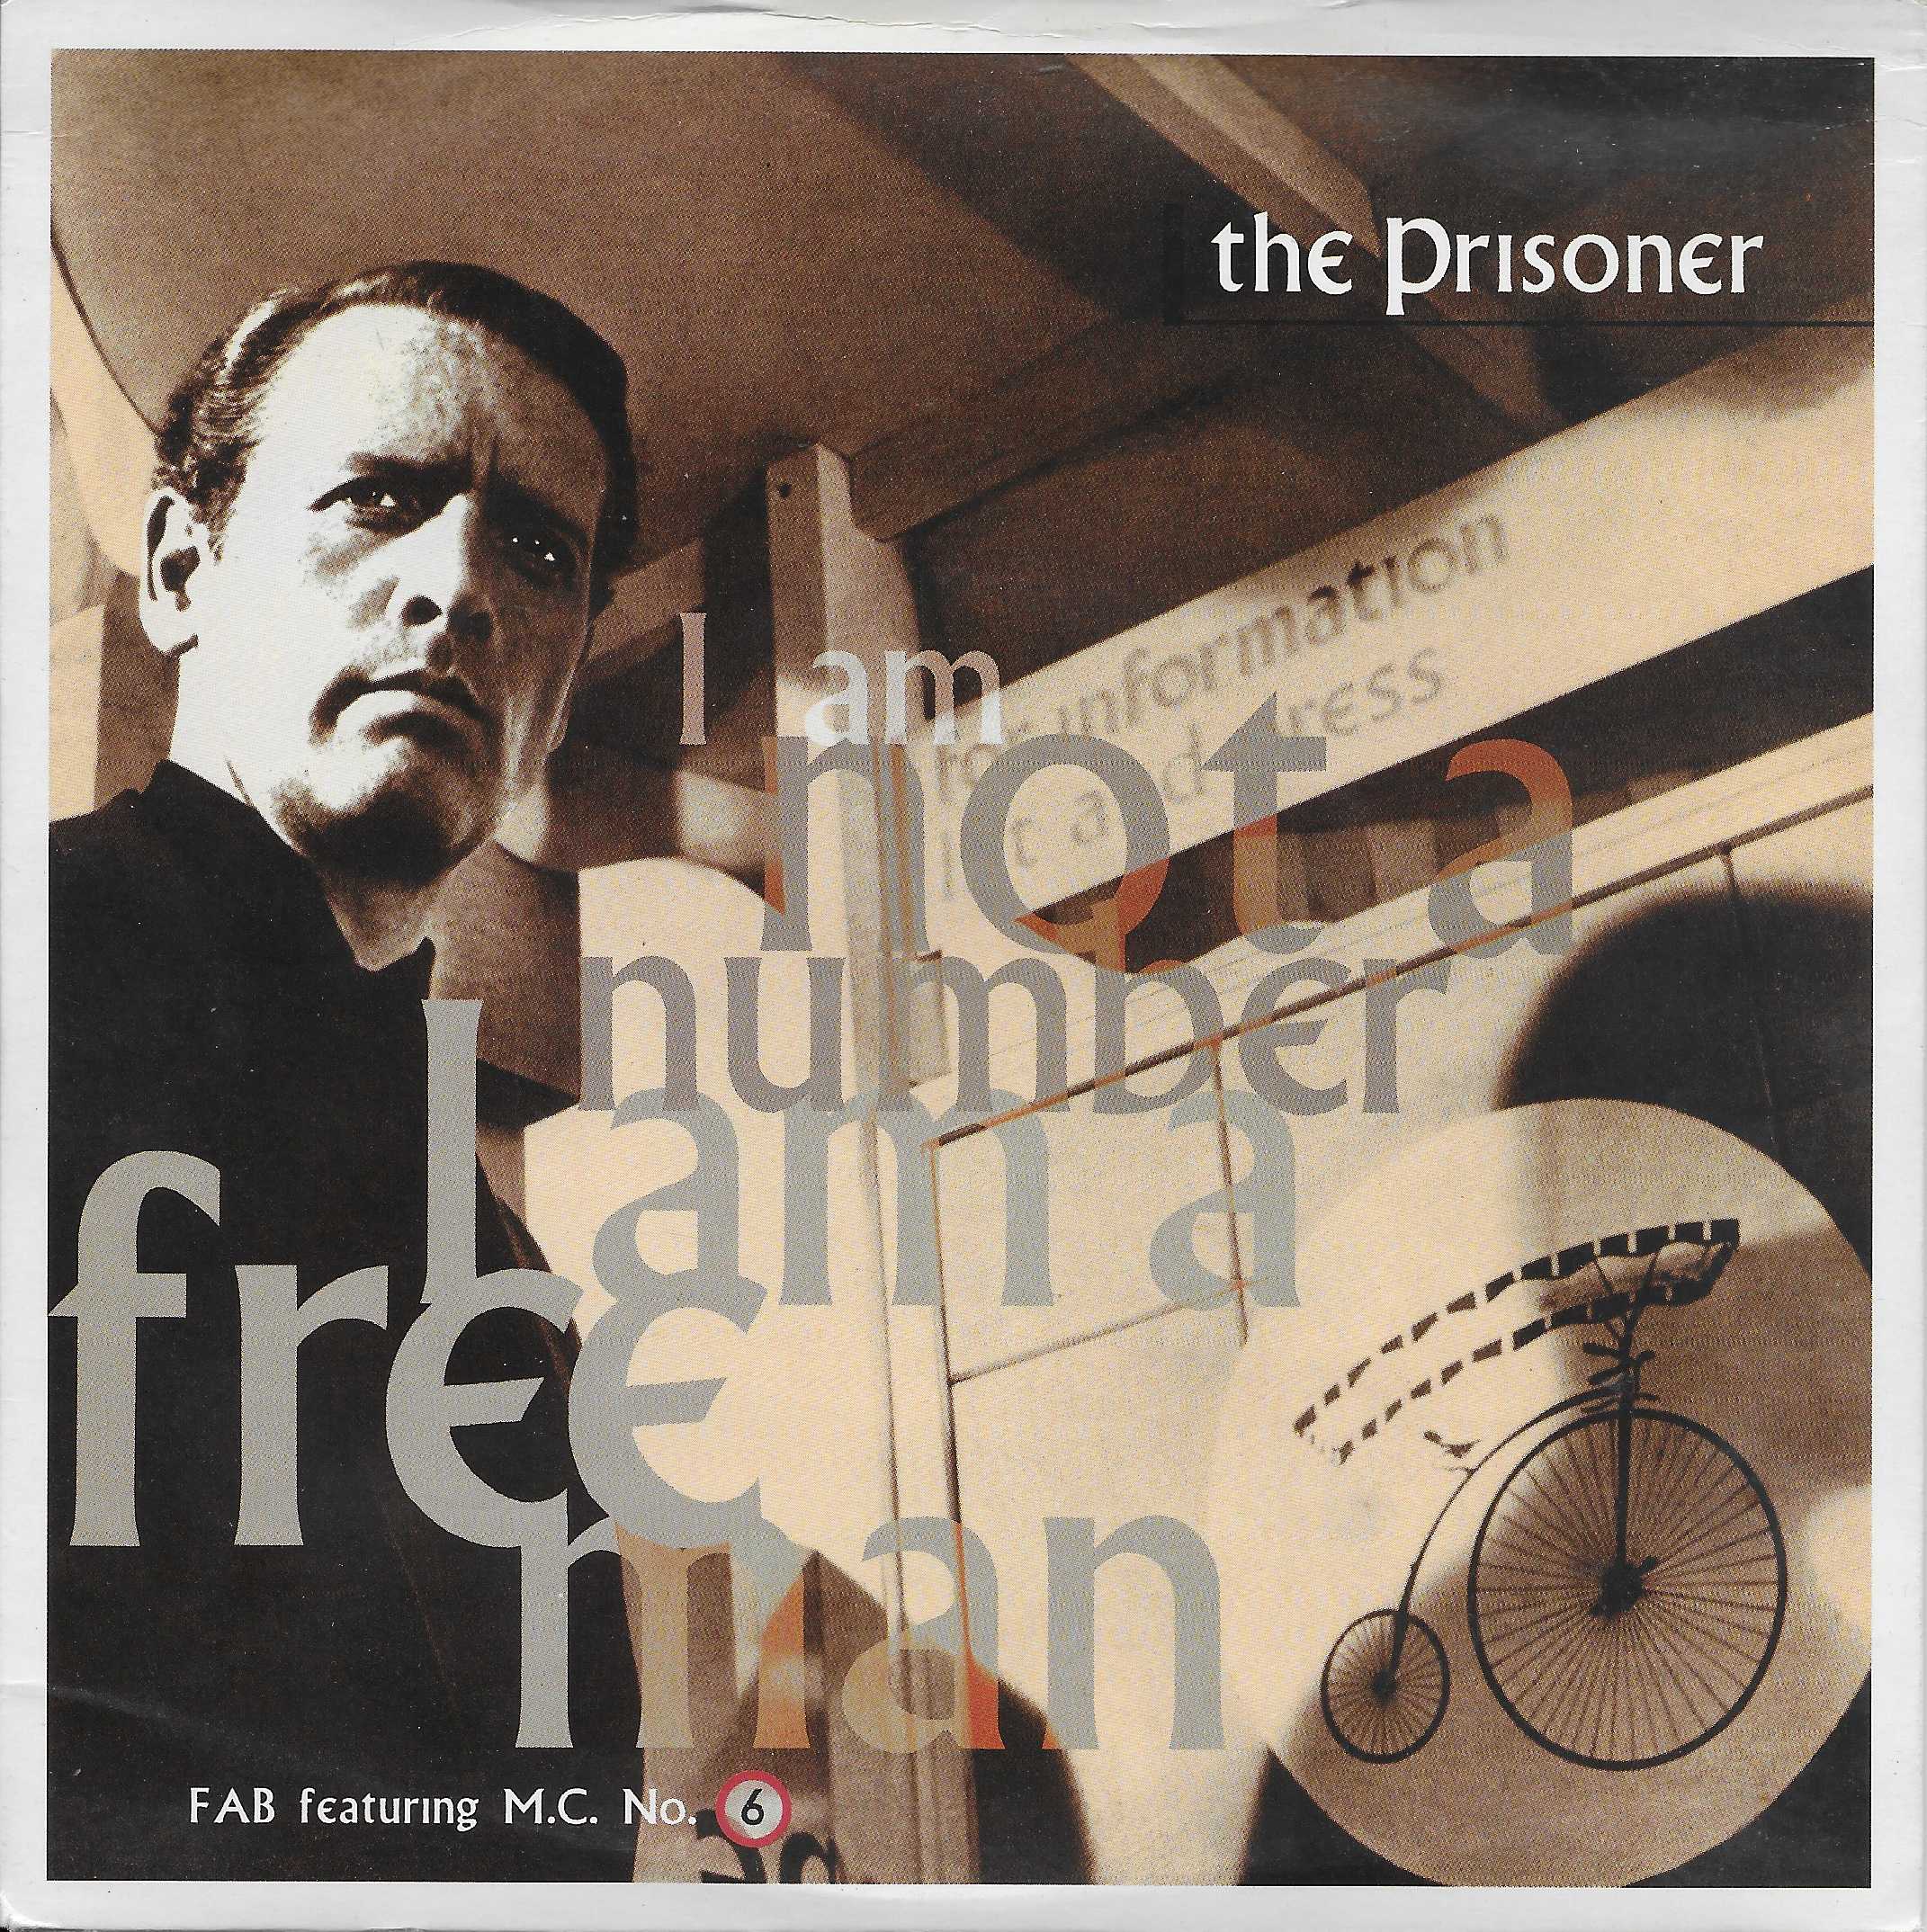 Picture of The prisoner (Free man mix) by artist Ron Grainer / F. A. B. from ITV, Channel 4 and Channel 5 singles library